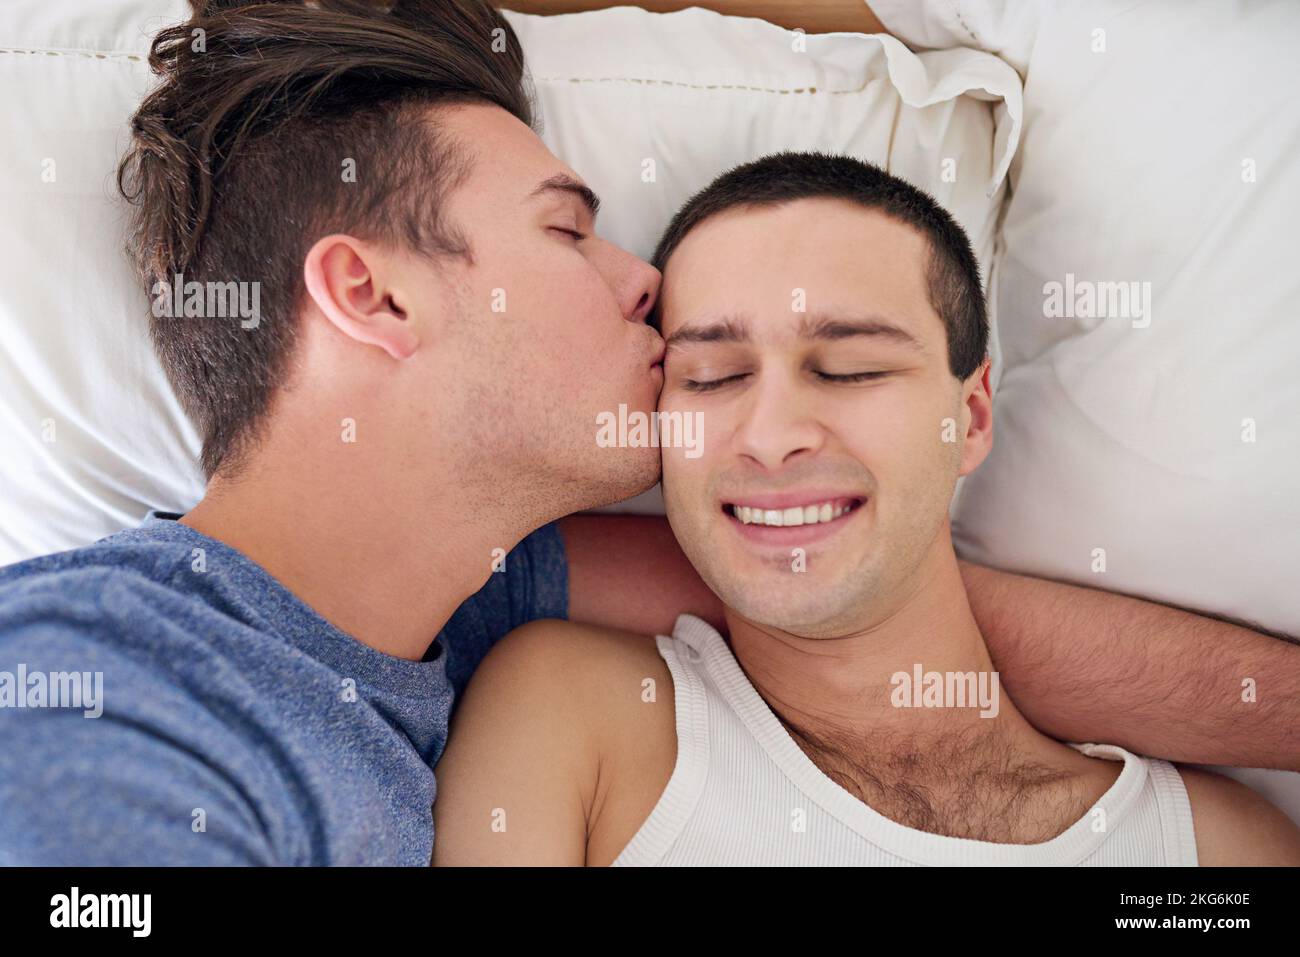 Morning, beautiful. a young gay couple relaxing in bed. Stock Photo